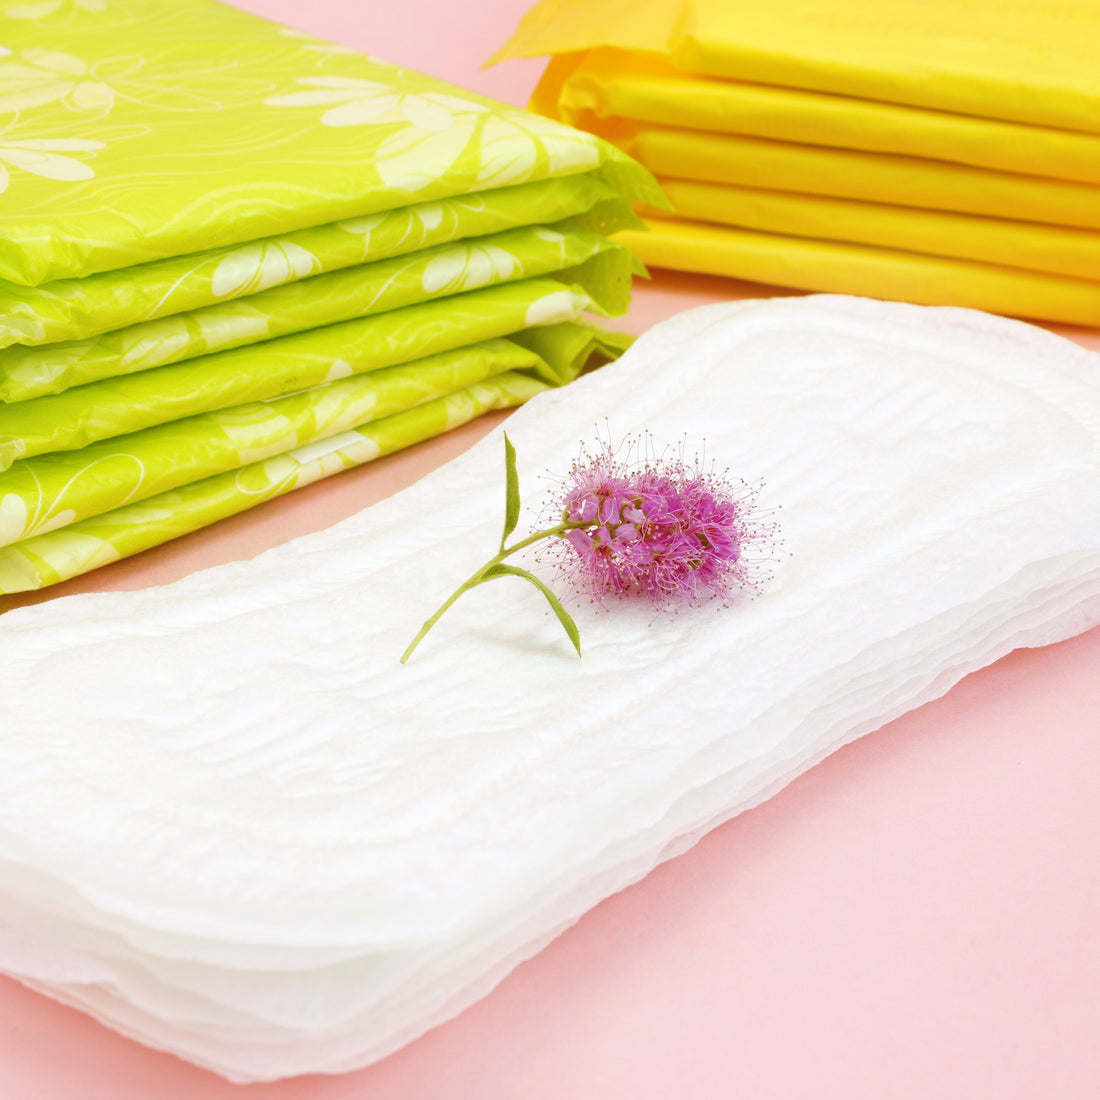 Sanitary Pad Rashes - Common Causes we bet you didn't know!